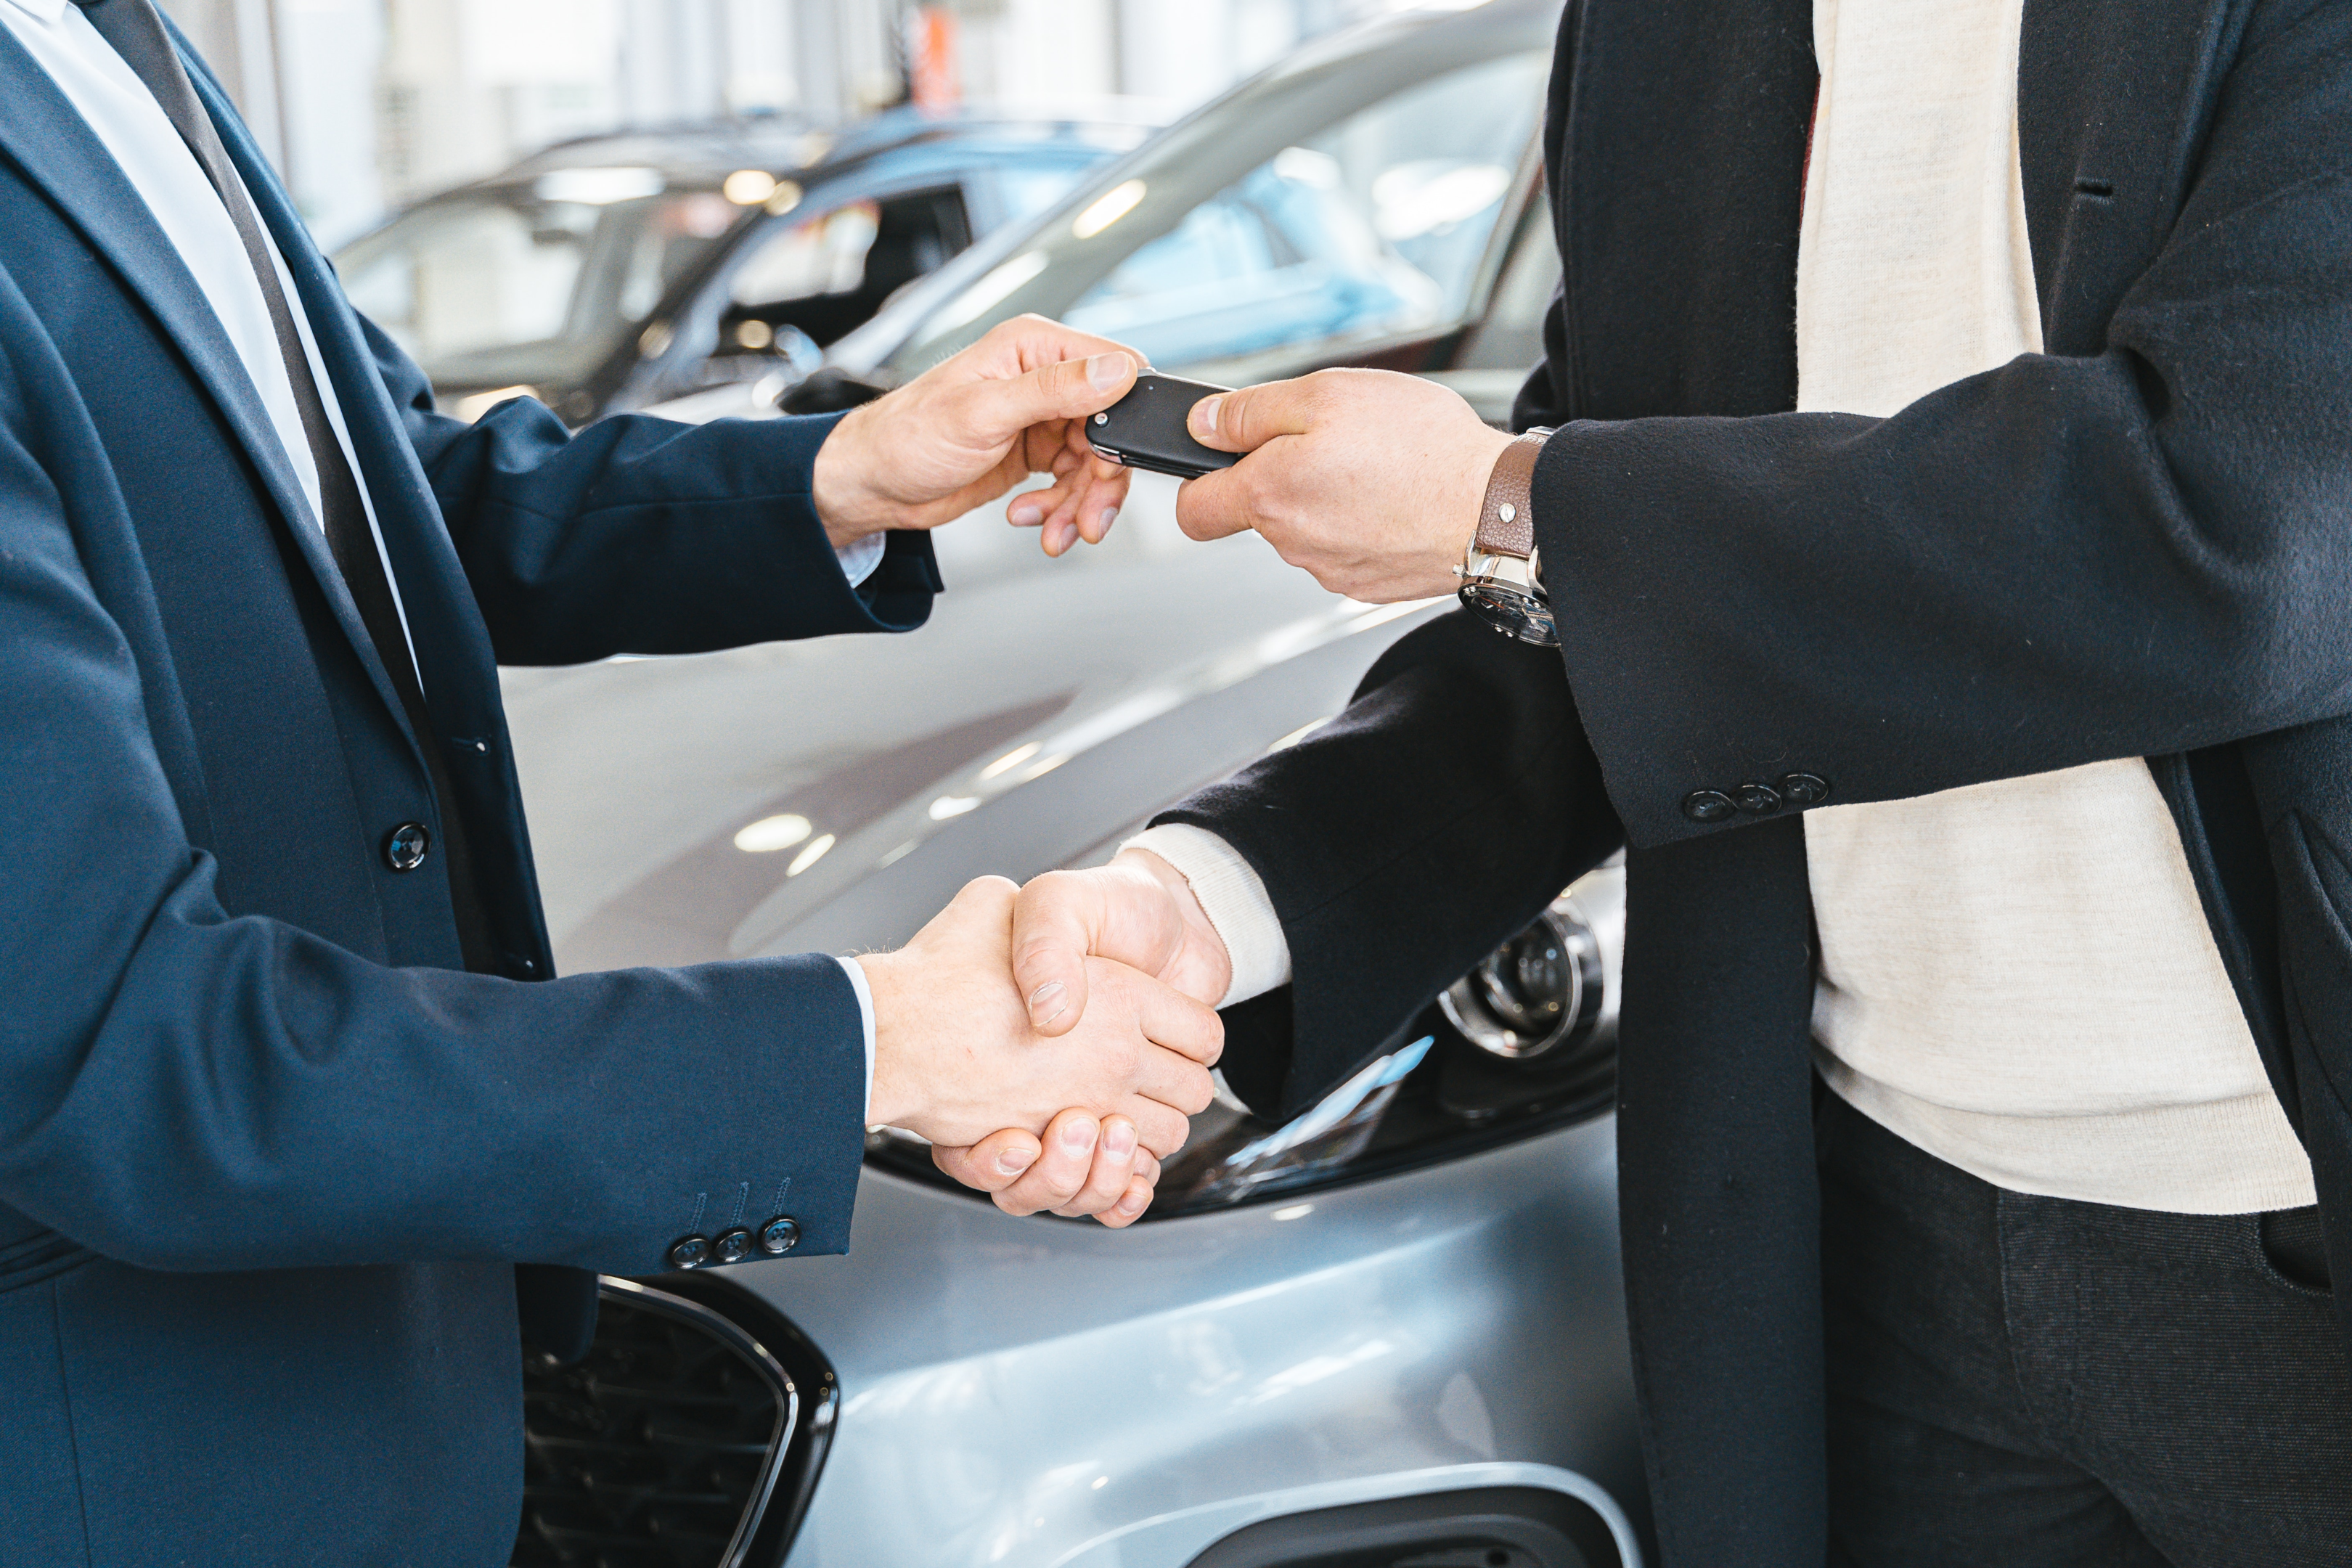 Shaking hands and exchanging car keys after used car sale